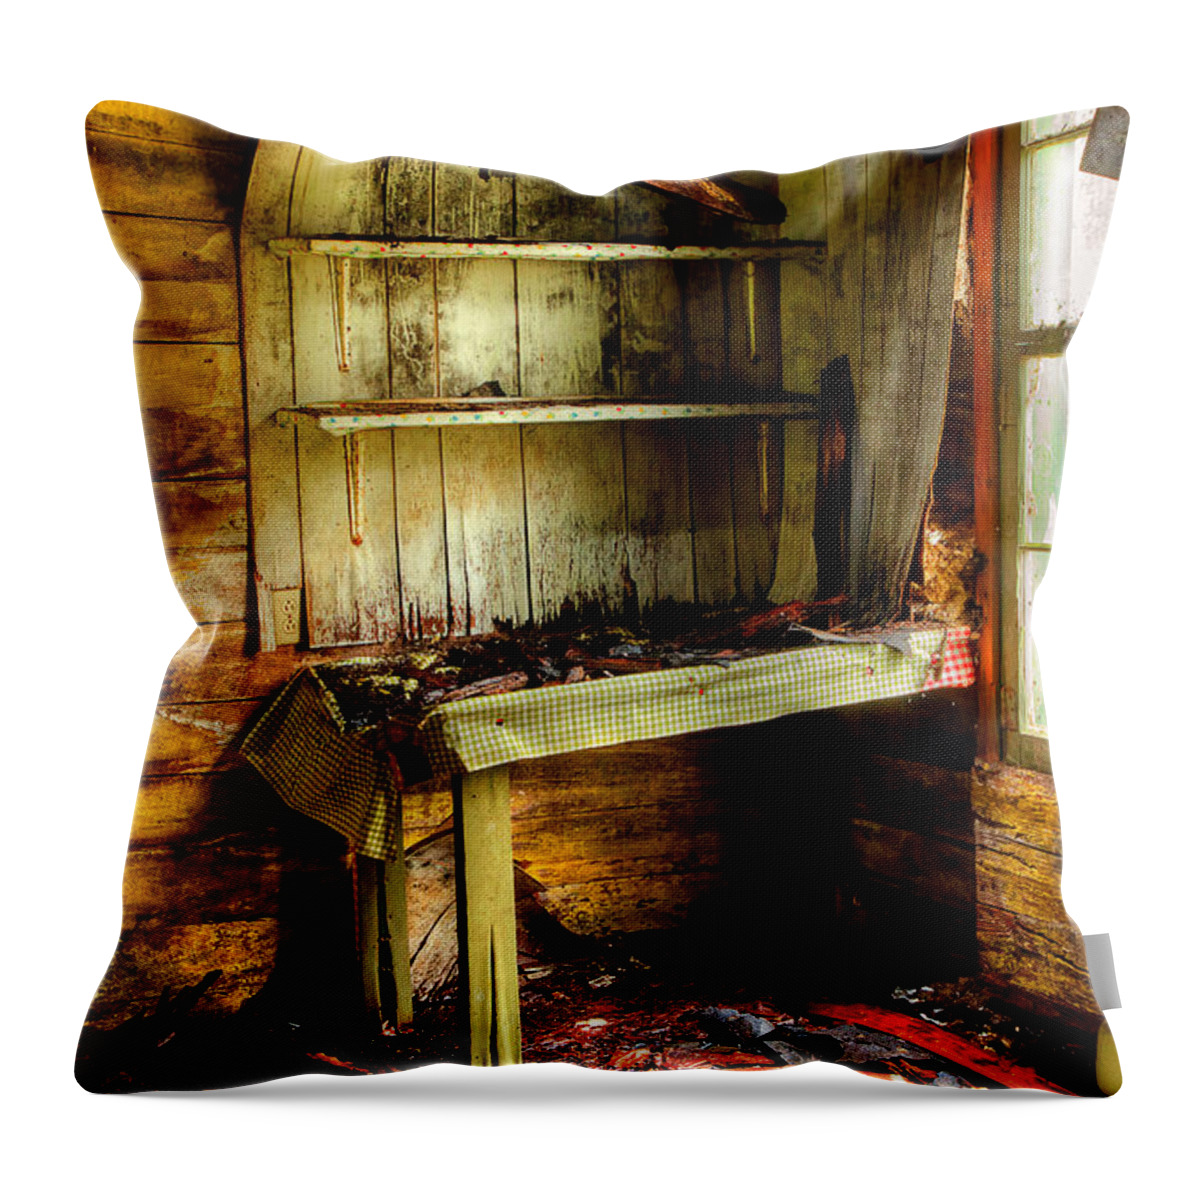 Deserted Home Throw Pillow featuring the photograph The Roof Is Falling by Michael Eingle